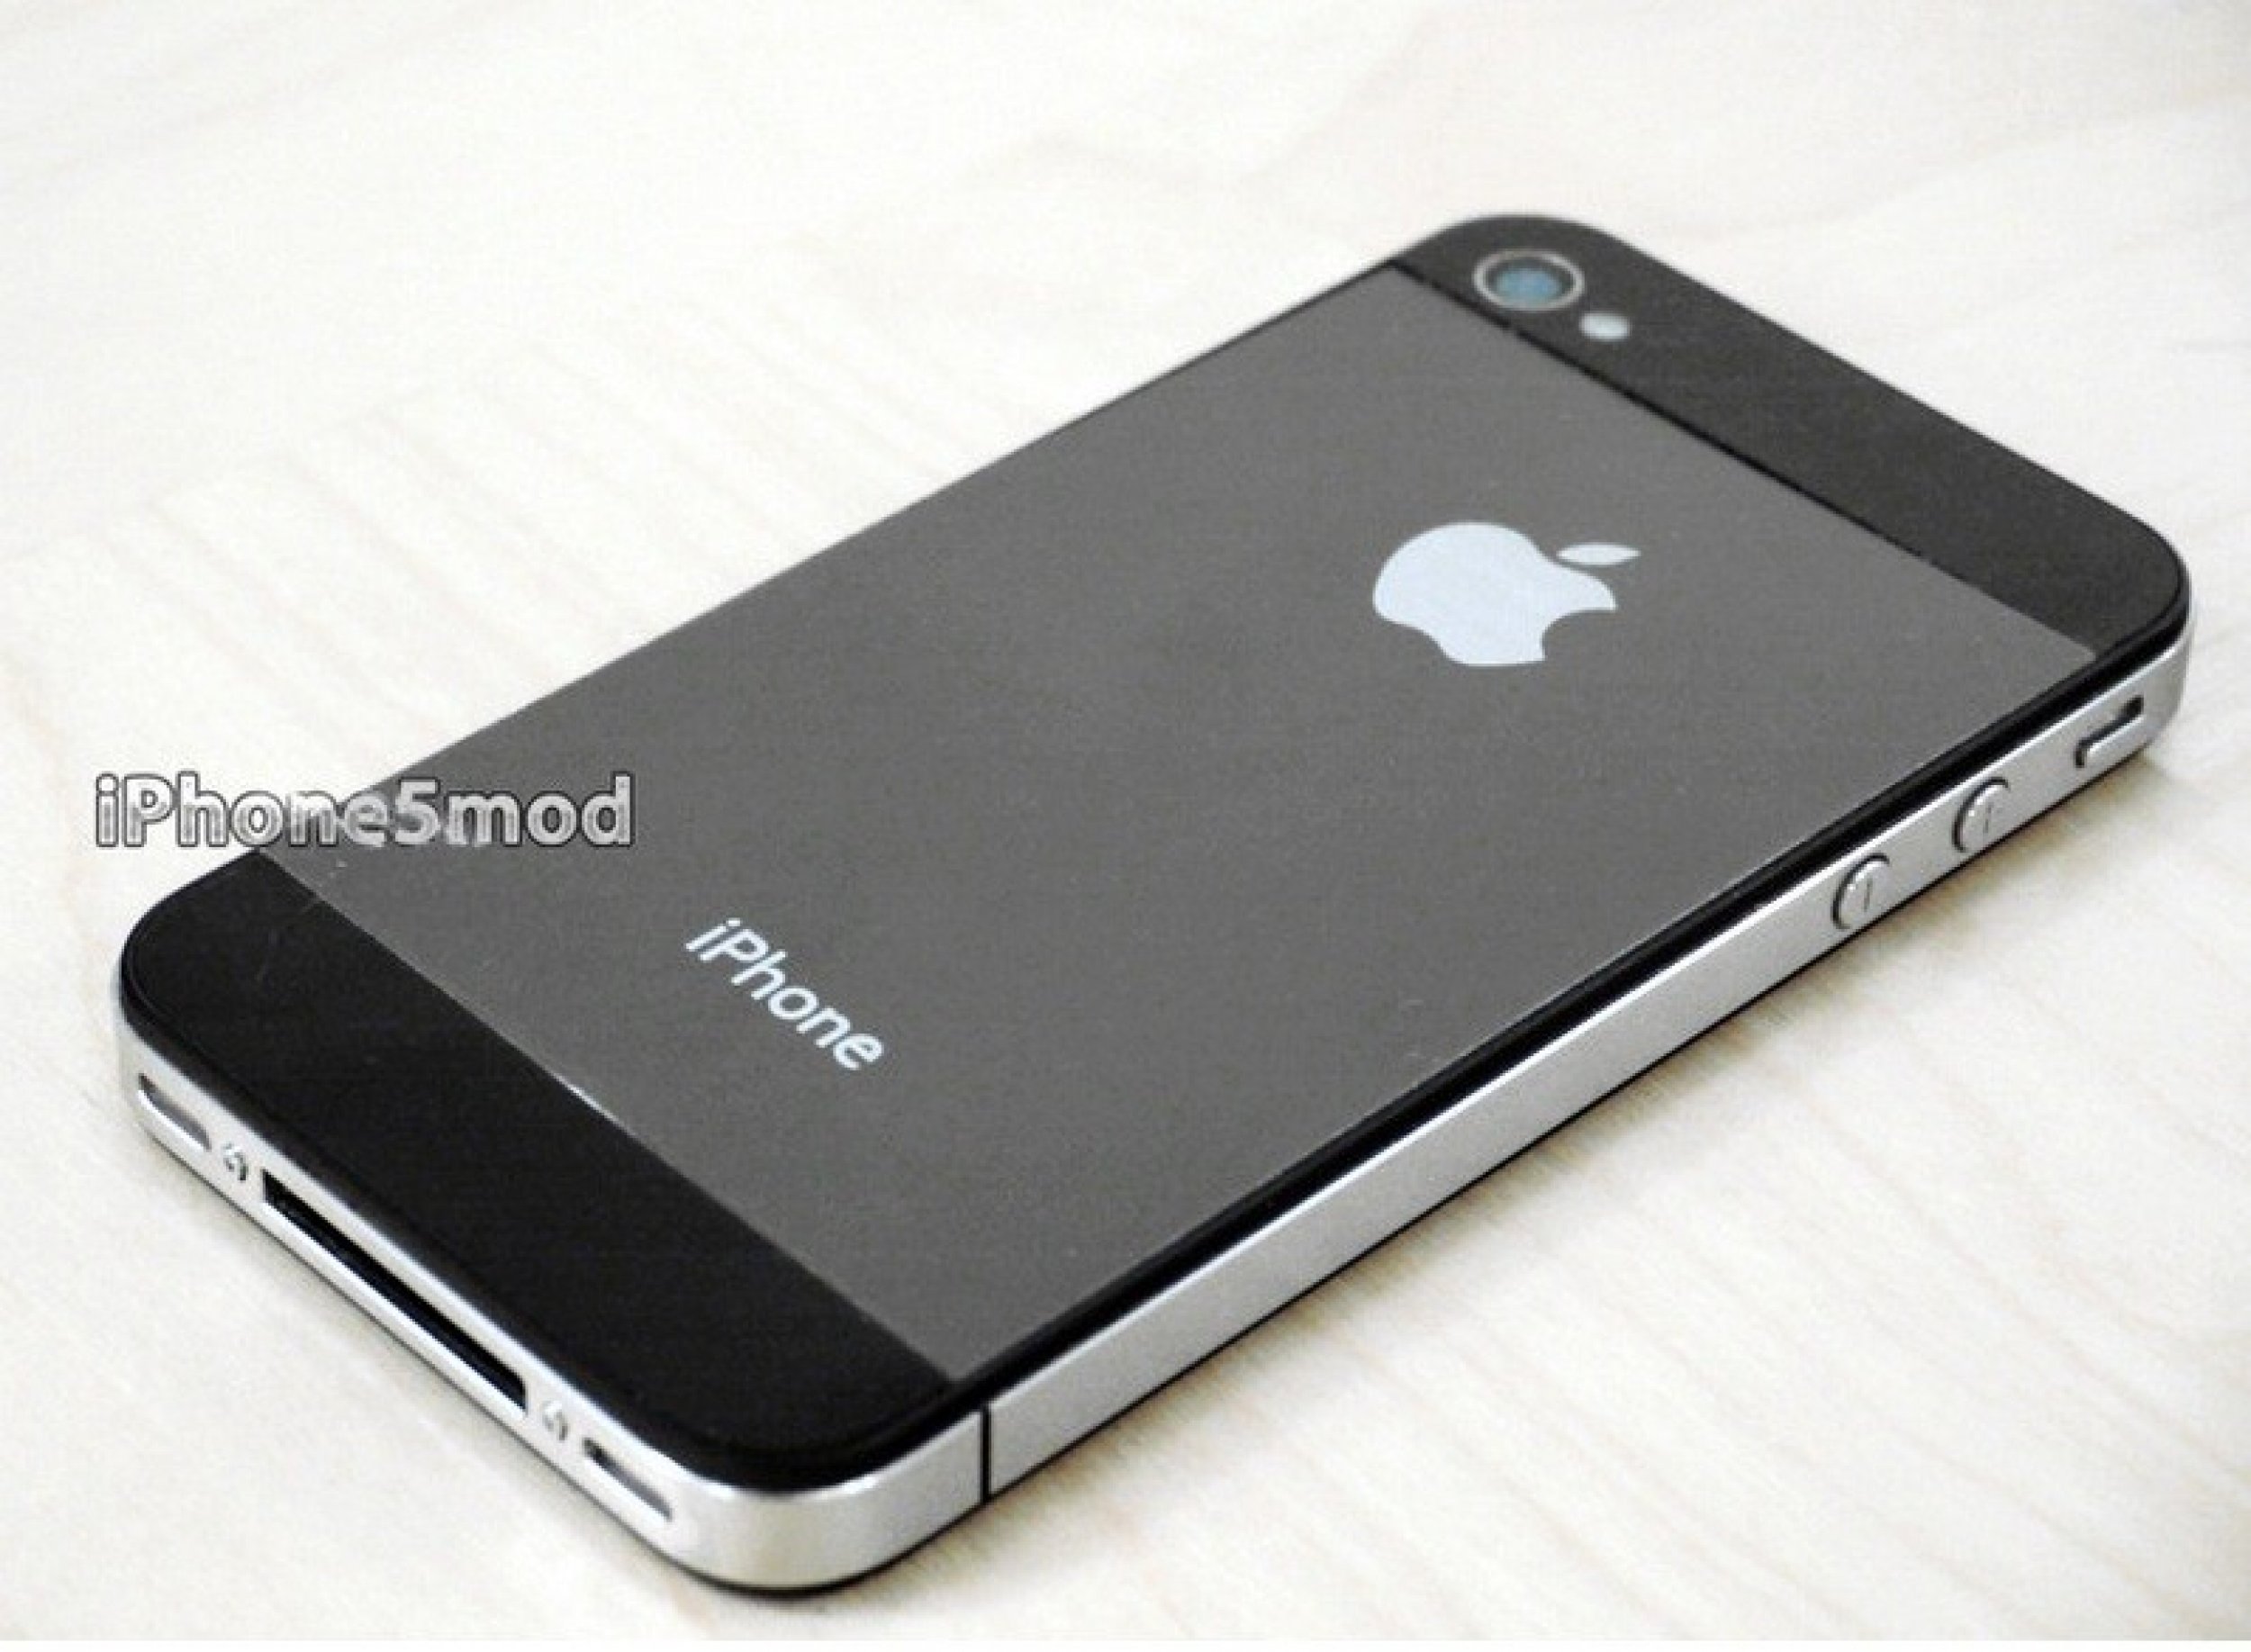 Apple iPhone 5 How To Modify Your iPhone 44S With Next-Gen Specs, Features PICTURES, VIDEO